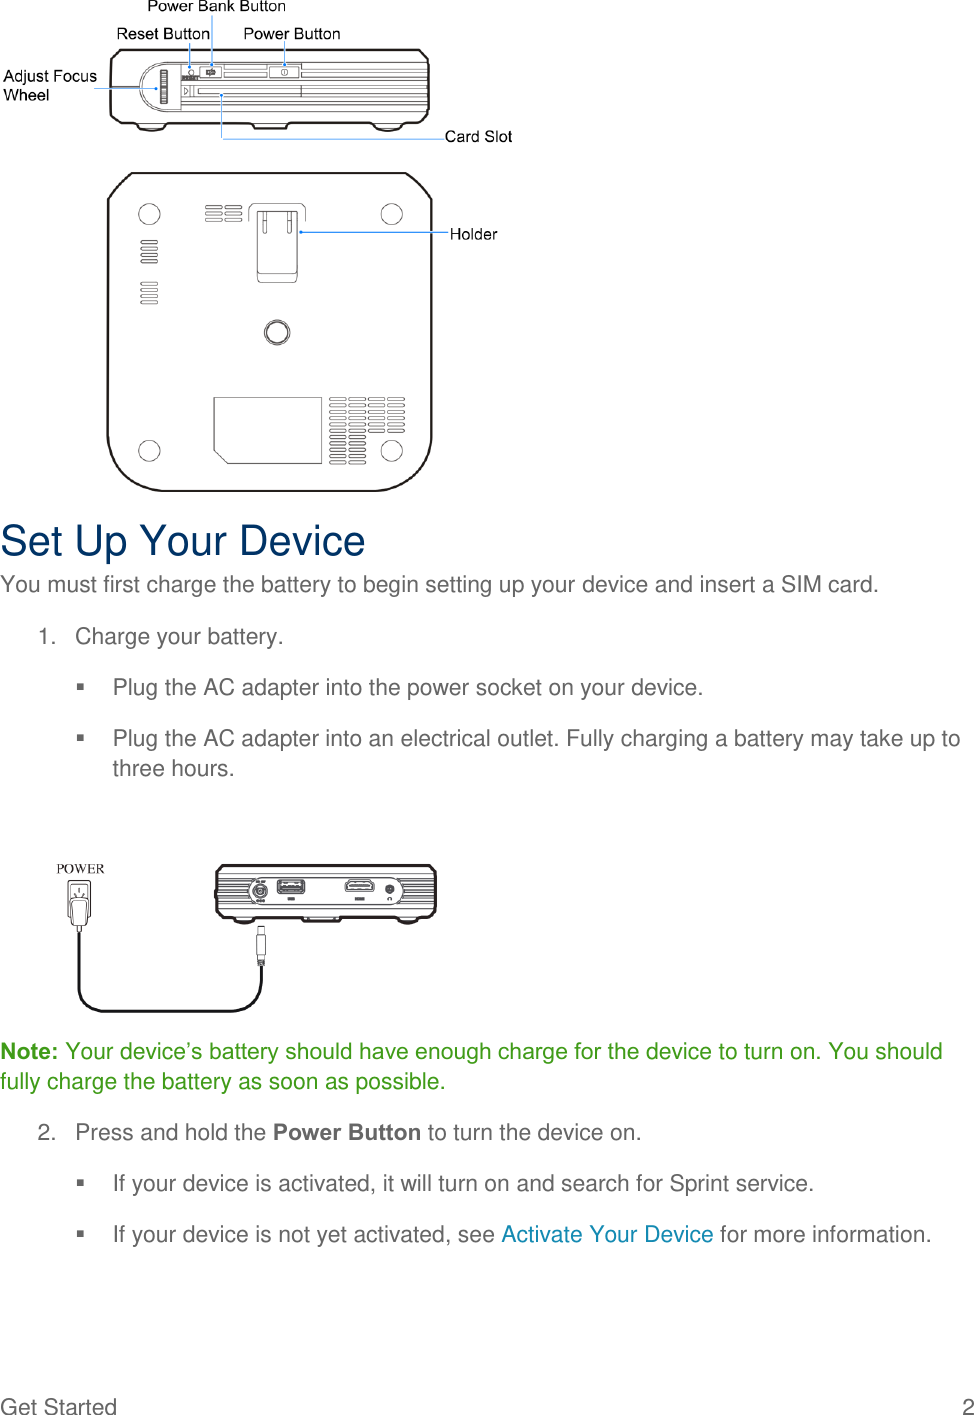  Get Started  2  Set Up Your Device You must first charge the battery to begin setting up your device and insert a SIM card. 1.  Charge your battery.   Plug the AC adapter into the power socket on your device.   Plug the AC adapter into an electrical outlet. Fully charging a battery may take up to three hours.  Note: Your device’s battery should have enough charge for the device to turn on. You should fully charge the battery as soon as possible. 2.  Press and hold the Power Button to turn the device on.   If your device is activated, it will turn on and search for Sprint service.   If your device is not yet activated, see Activate Your Device for more information. 